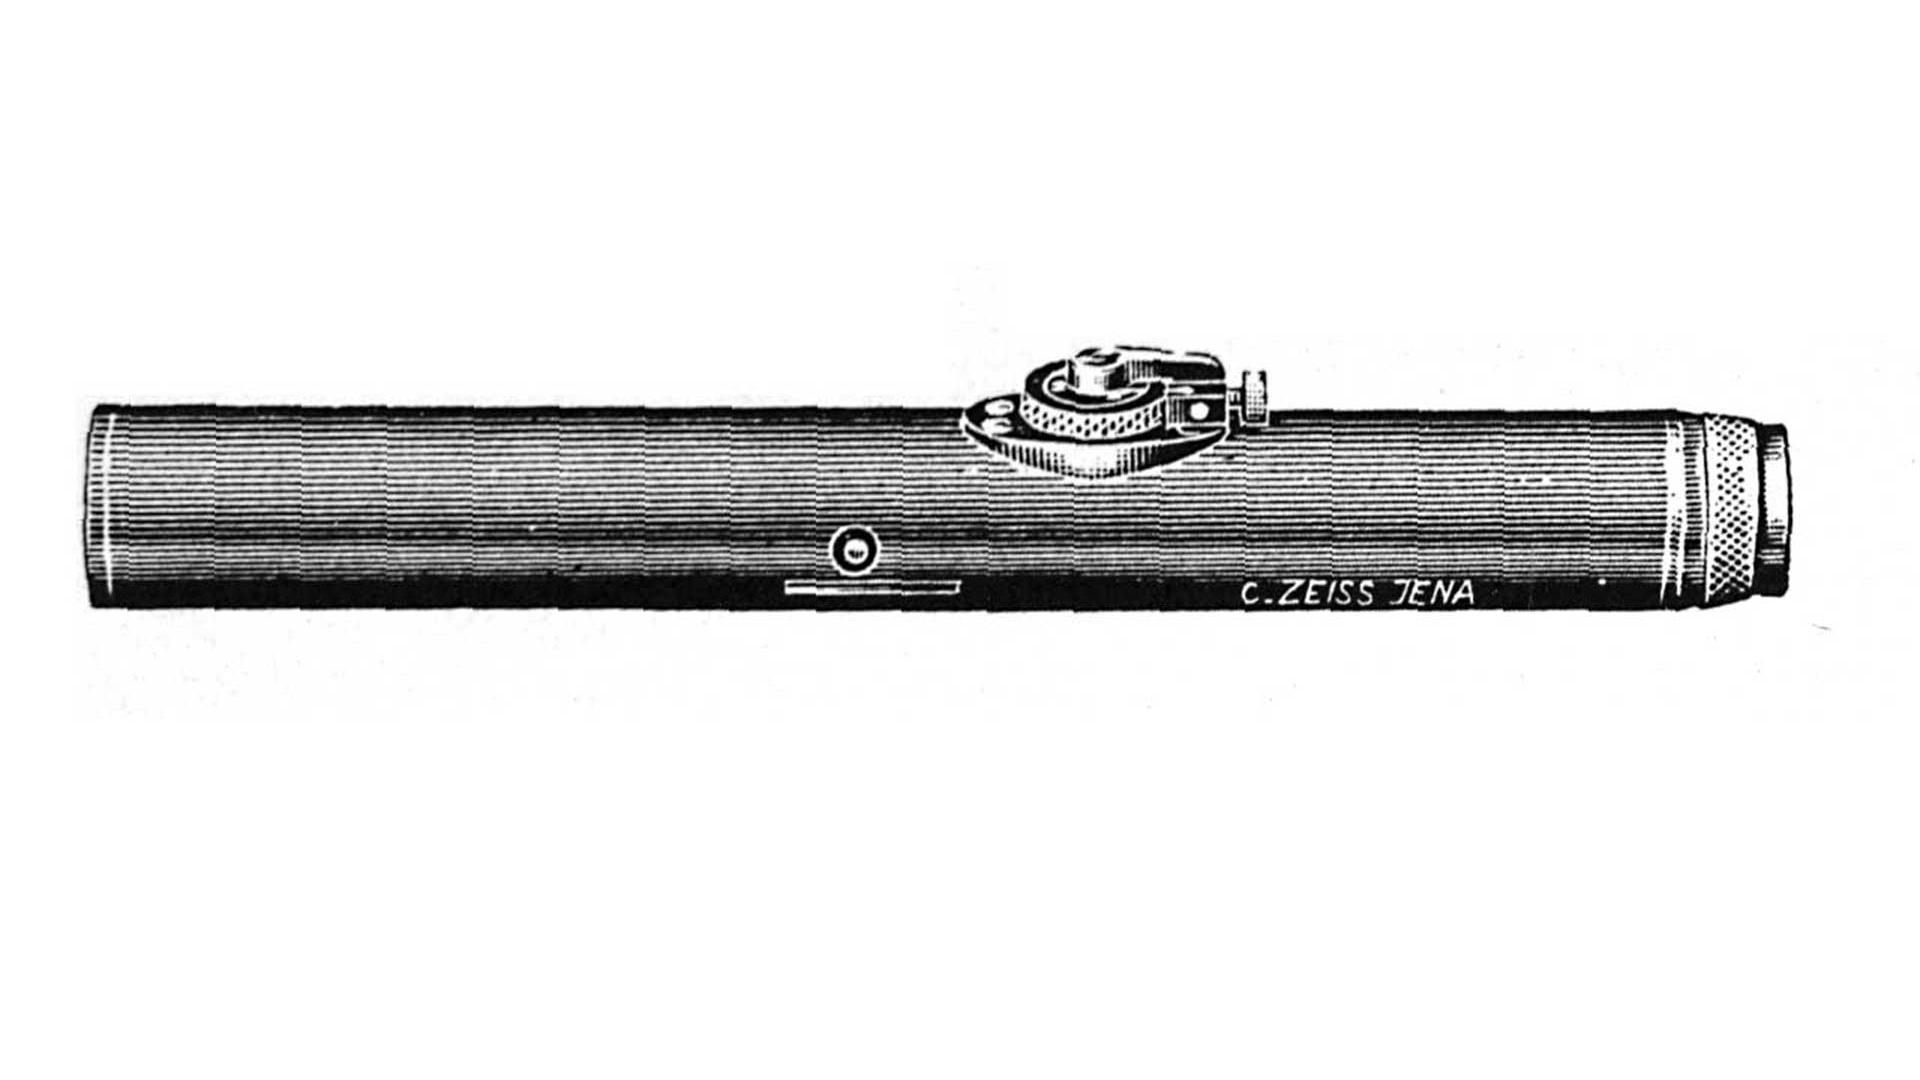 Riflescope with switchable magnification